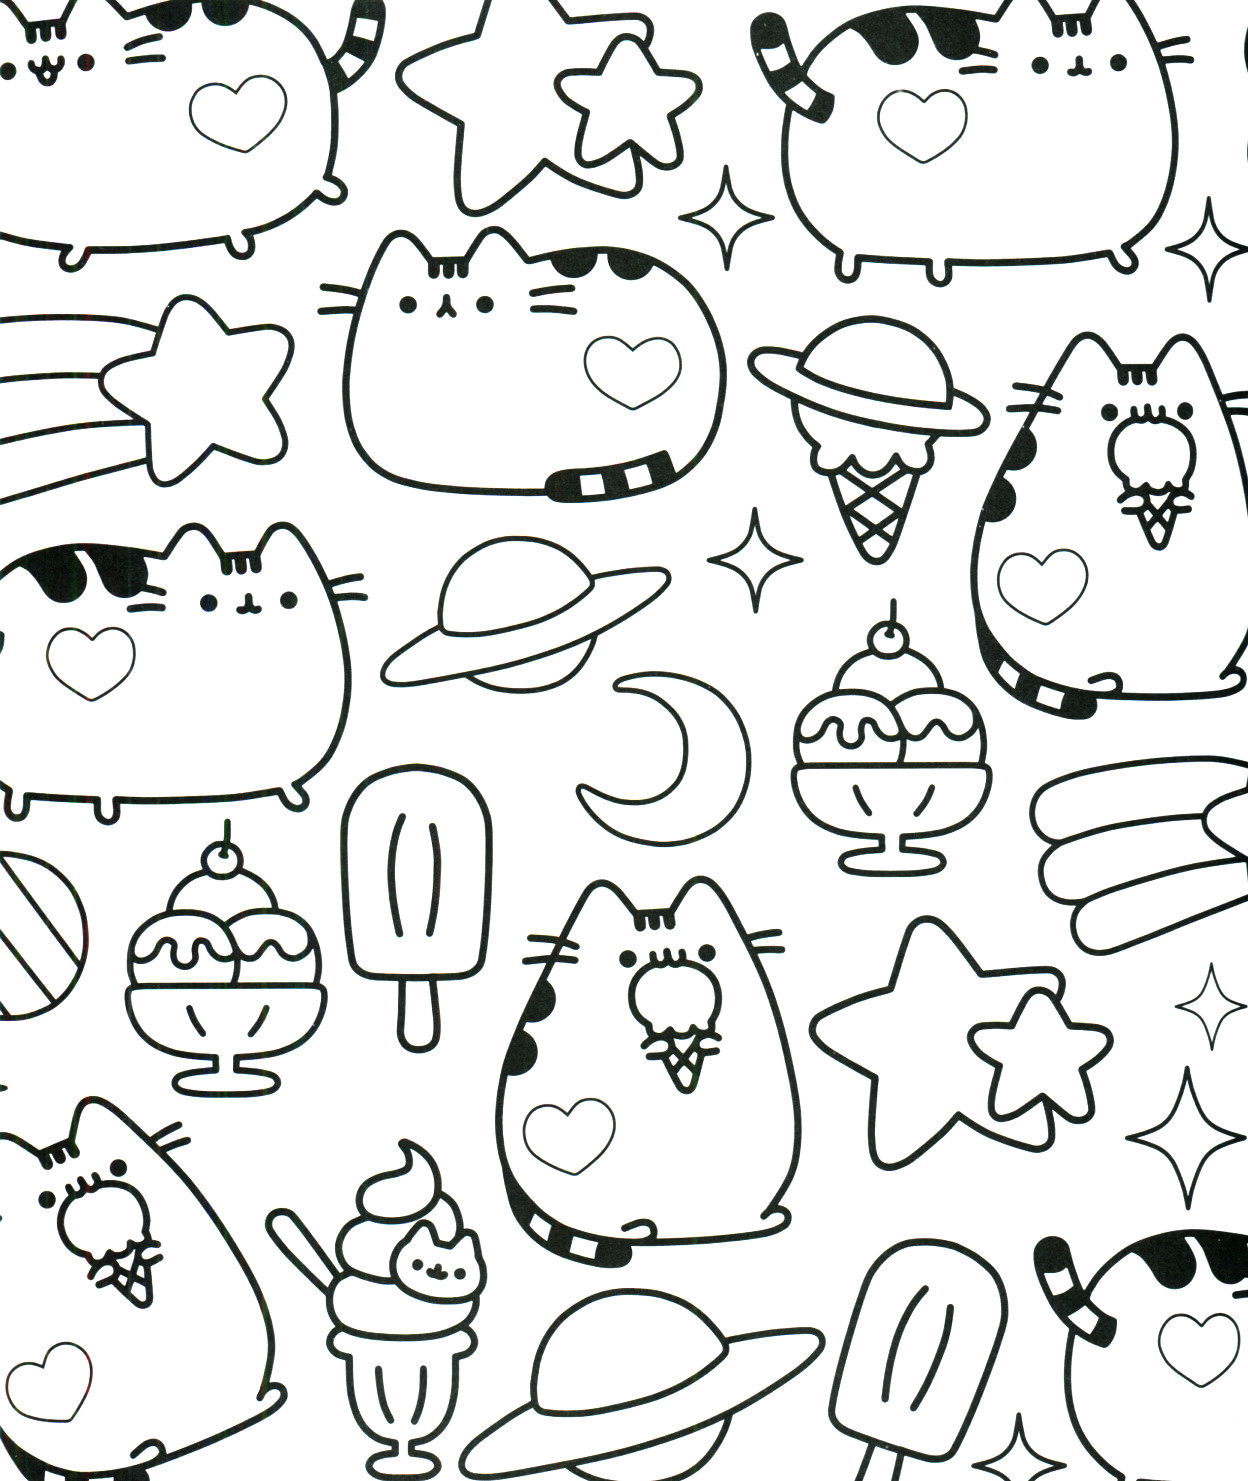 Pusheen Coloring Pages at Free printable colorings